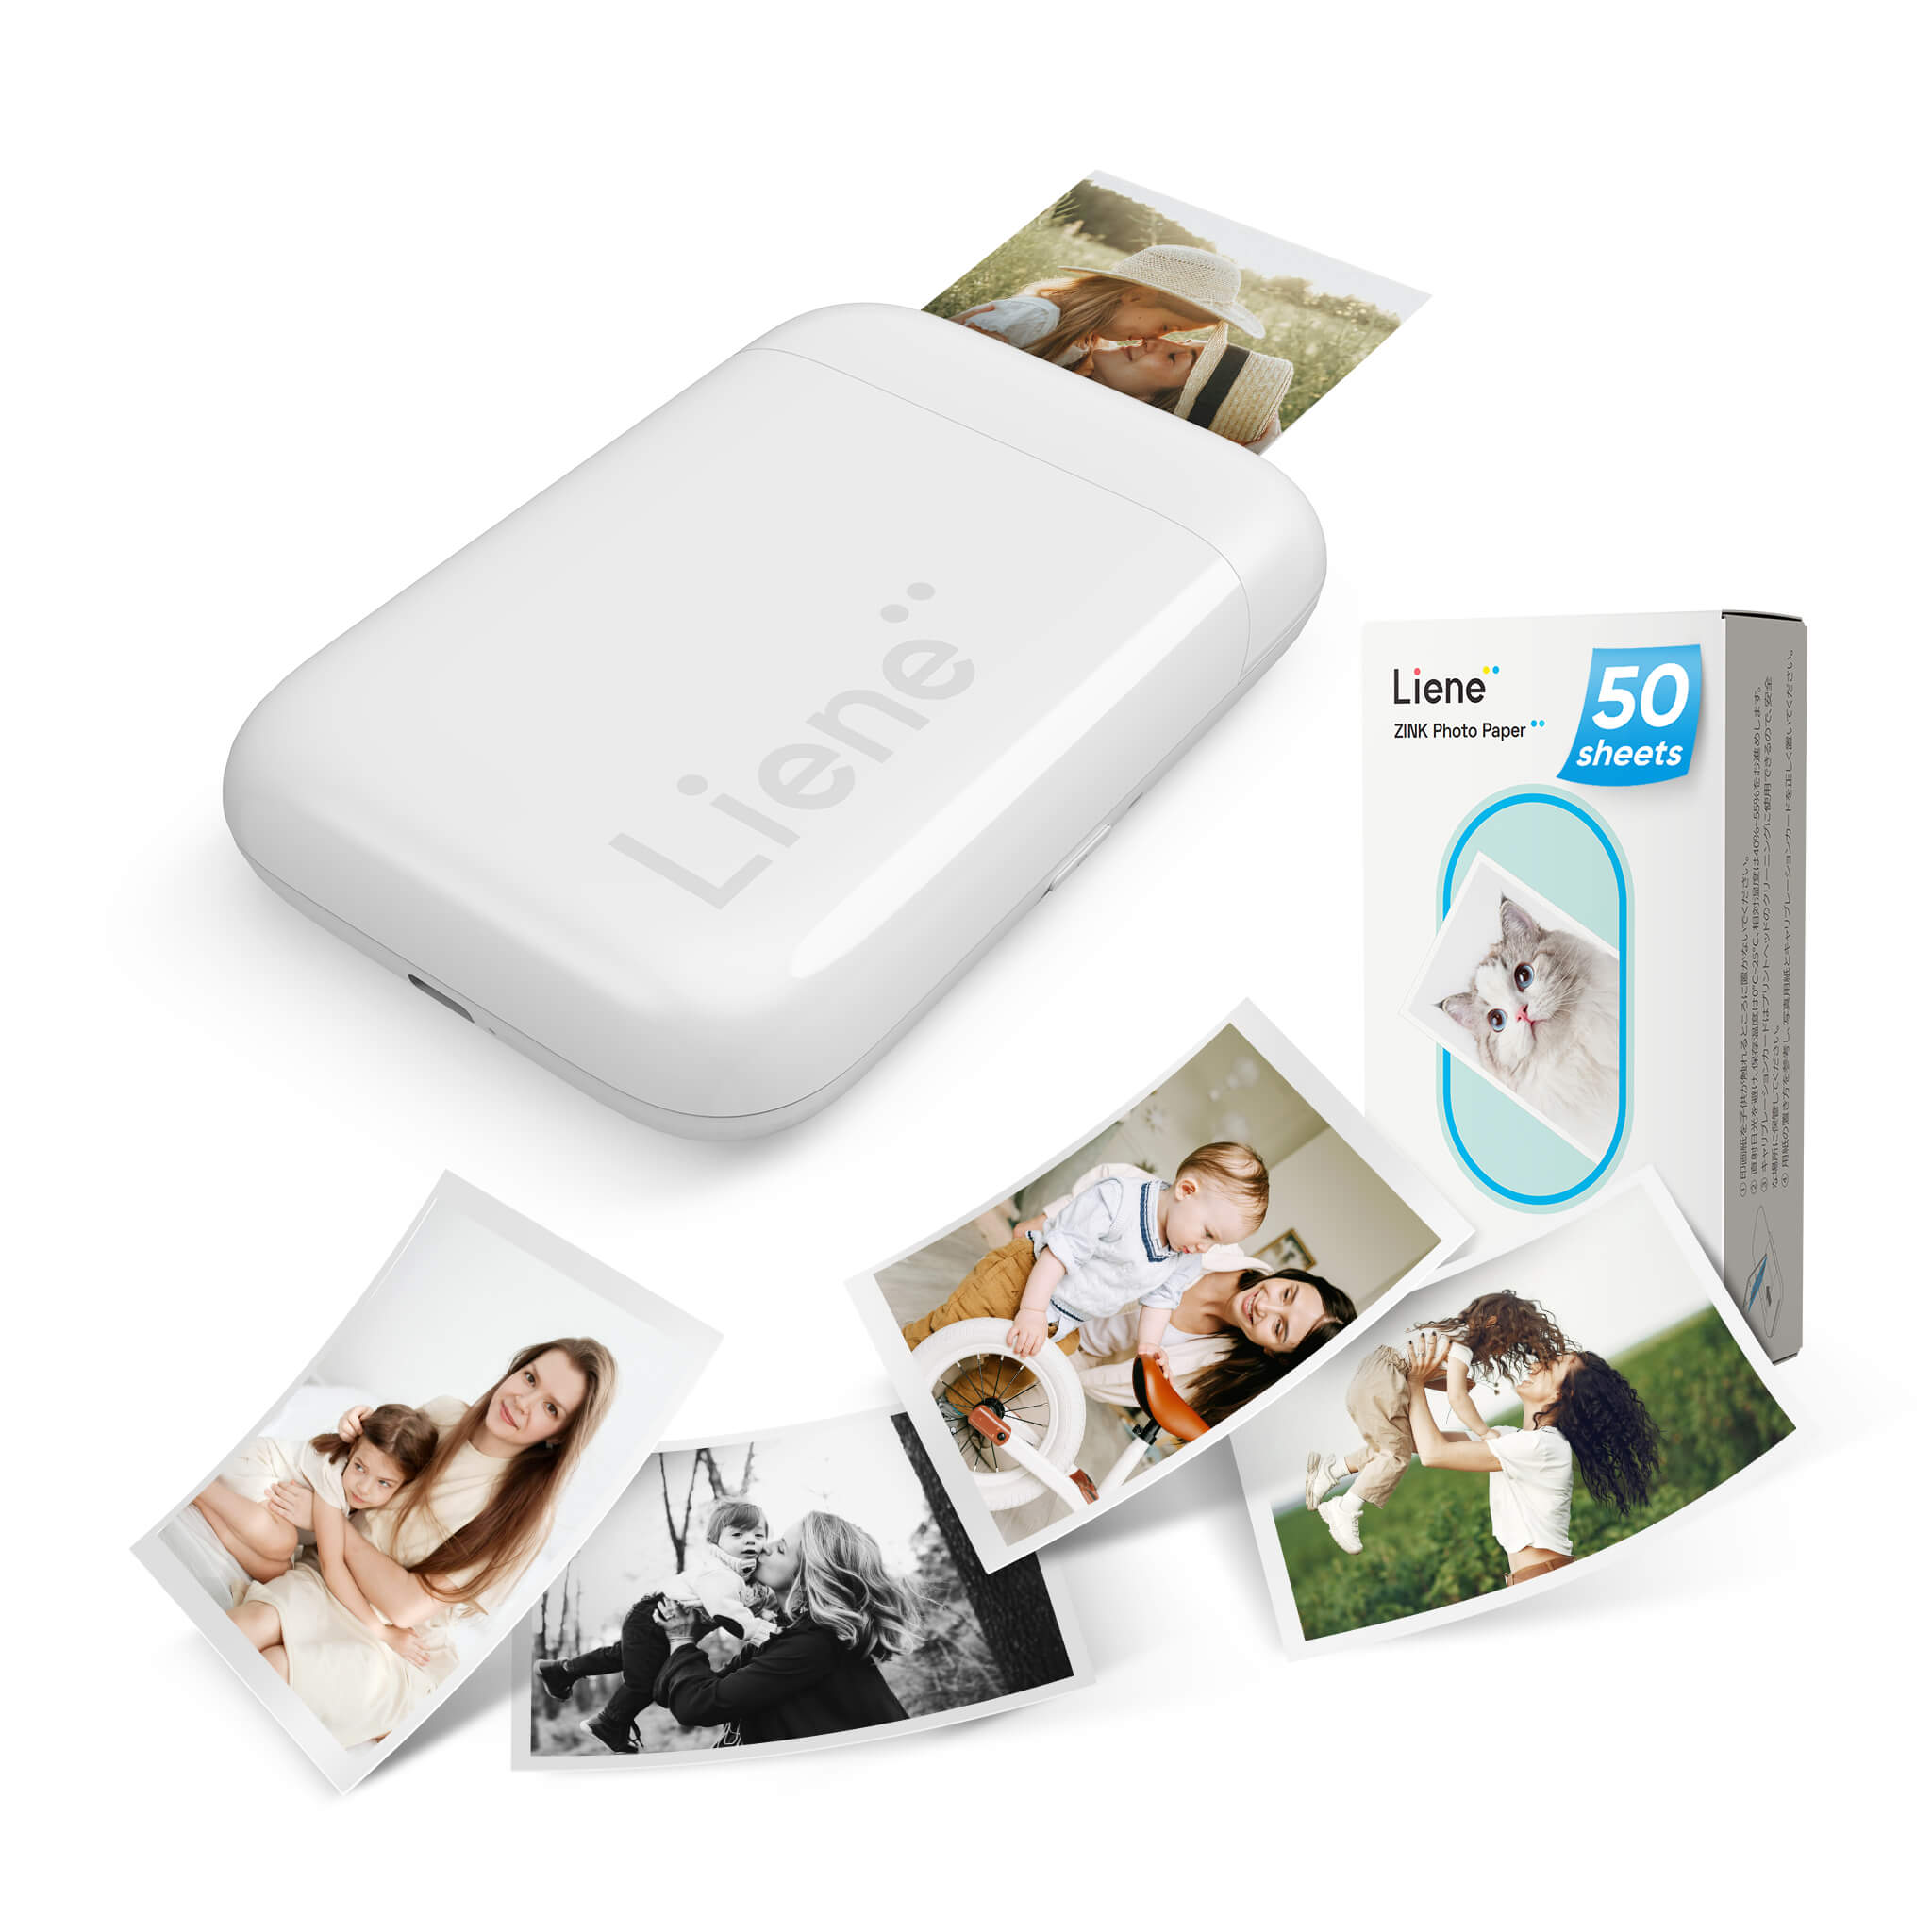 Liene Pearl K100 2x3" Portable Photo Printer - Pink (50 Zink Photo Papers)